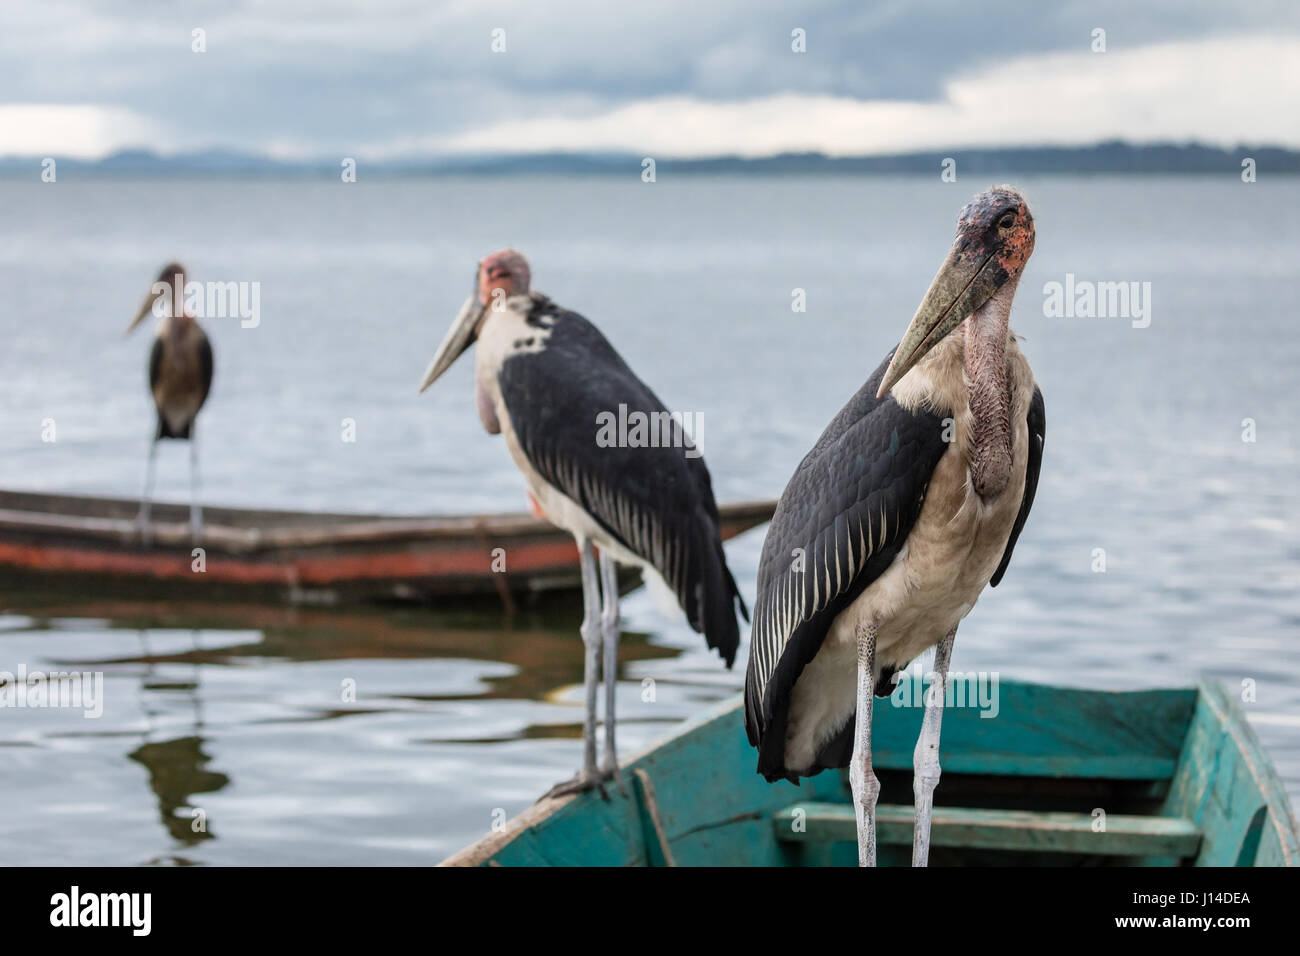 The Marabou Stork is a large wading bird in the stork family. Stock Photo